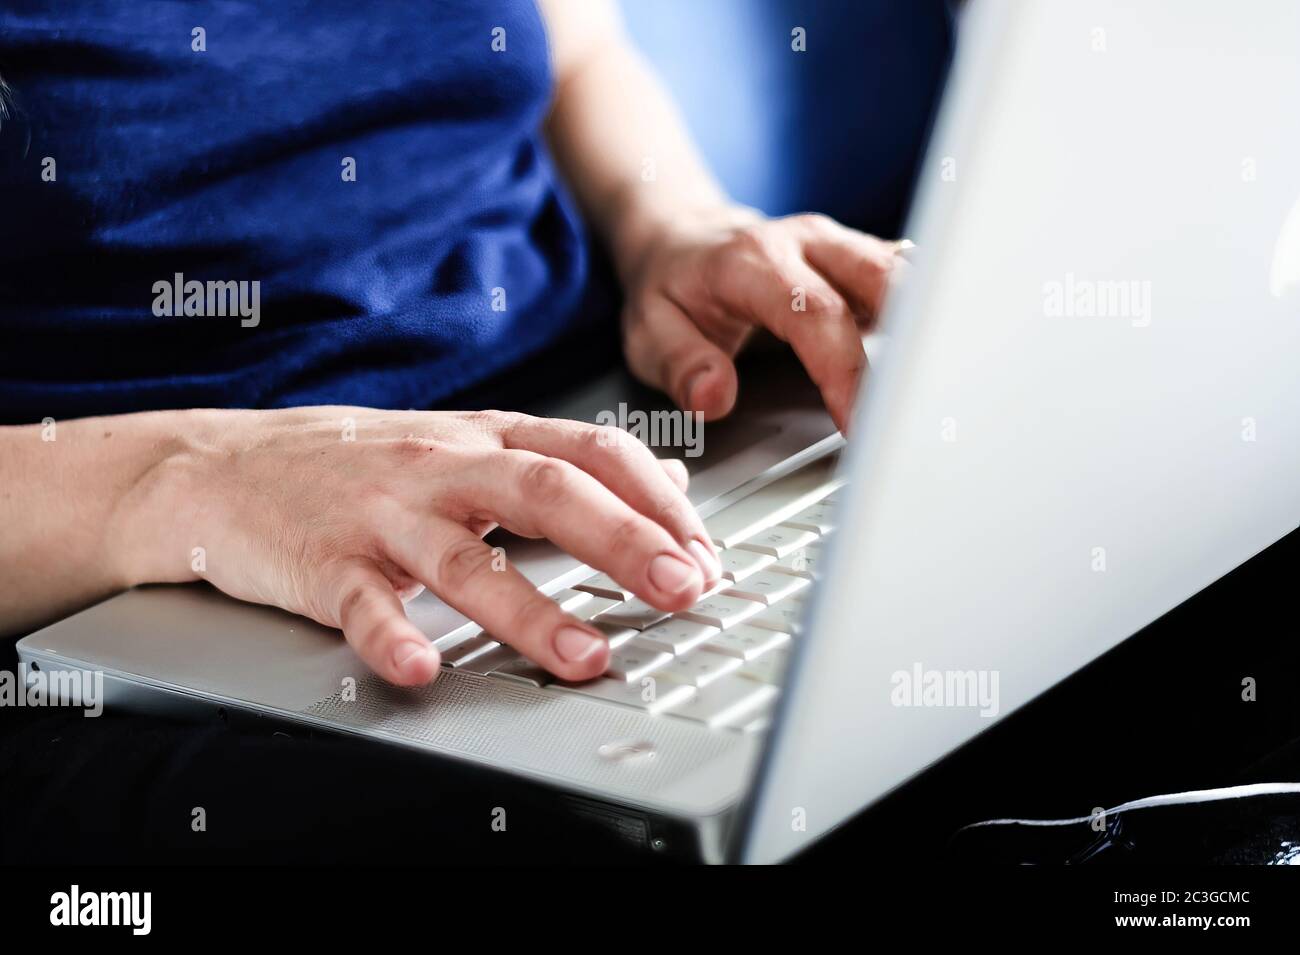 young caucasian woman typing on laptop keyboard. Working from home. Smart working concept Stock Photo